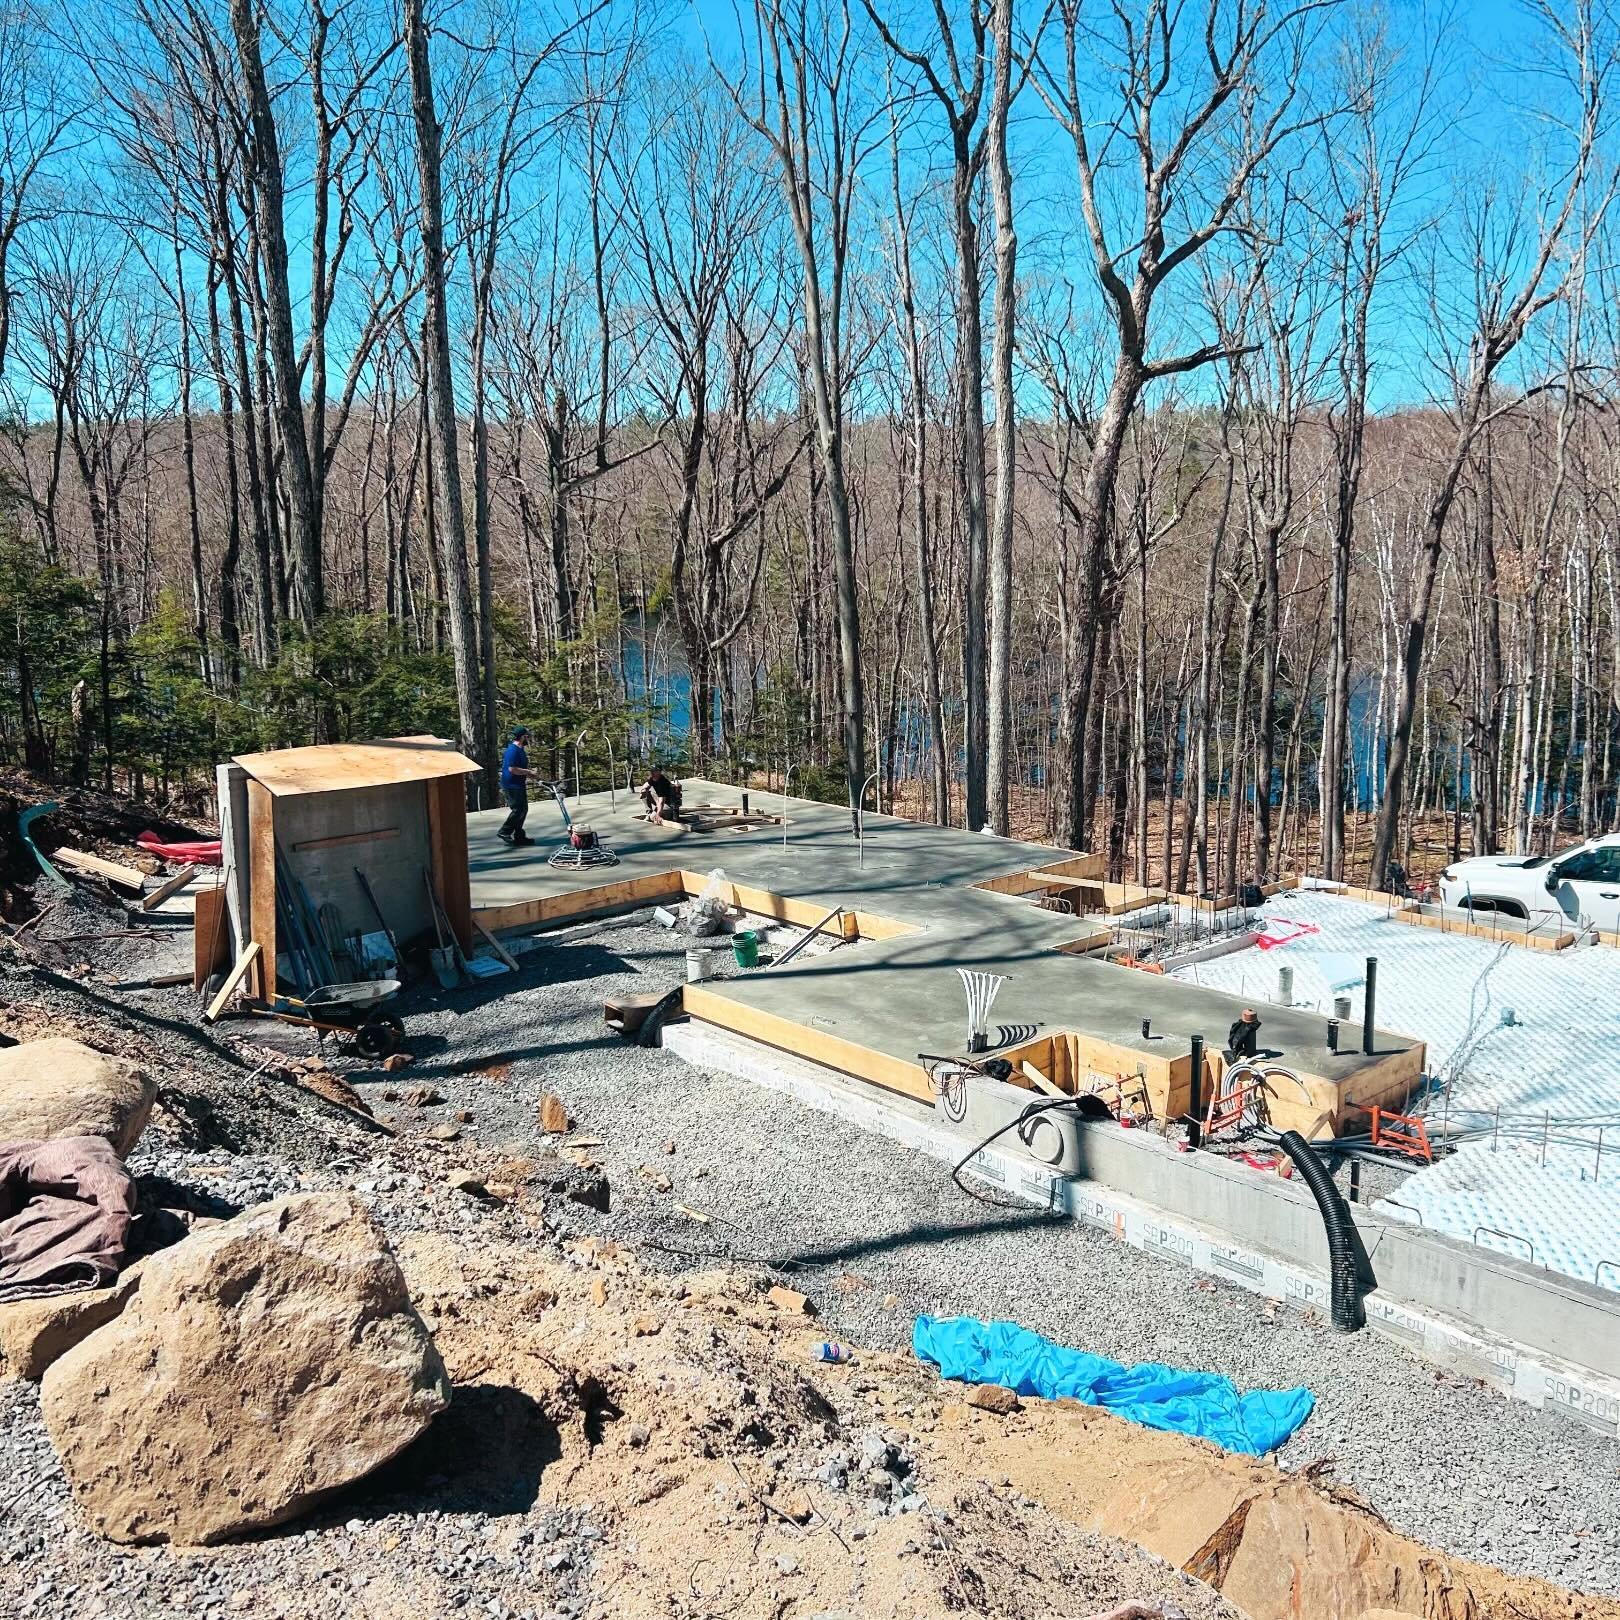 Custom home project in Calabogie by the Madawaska river. Radiant flooring and cantilever. This is (1) of (2) pours. The house is at the bottom of a very steep hill: two pumps were required to get it done @measured.construction

#constructionottawa #o